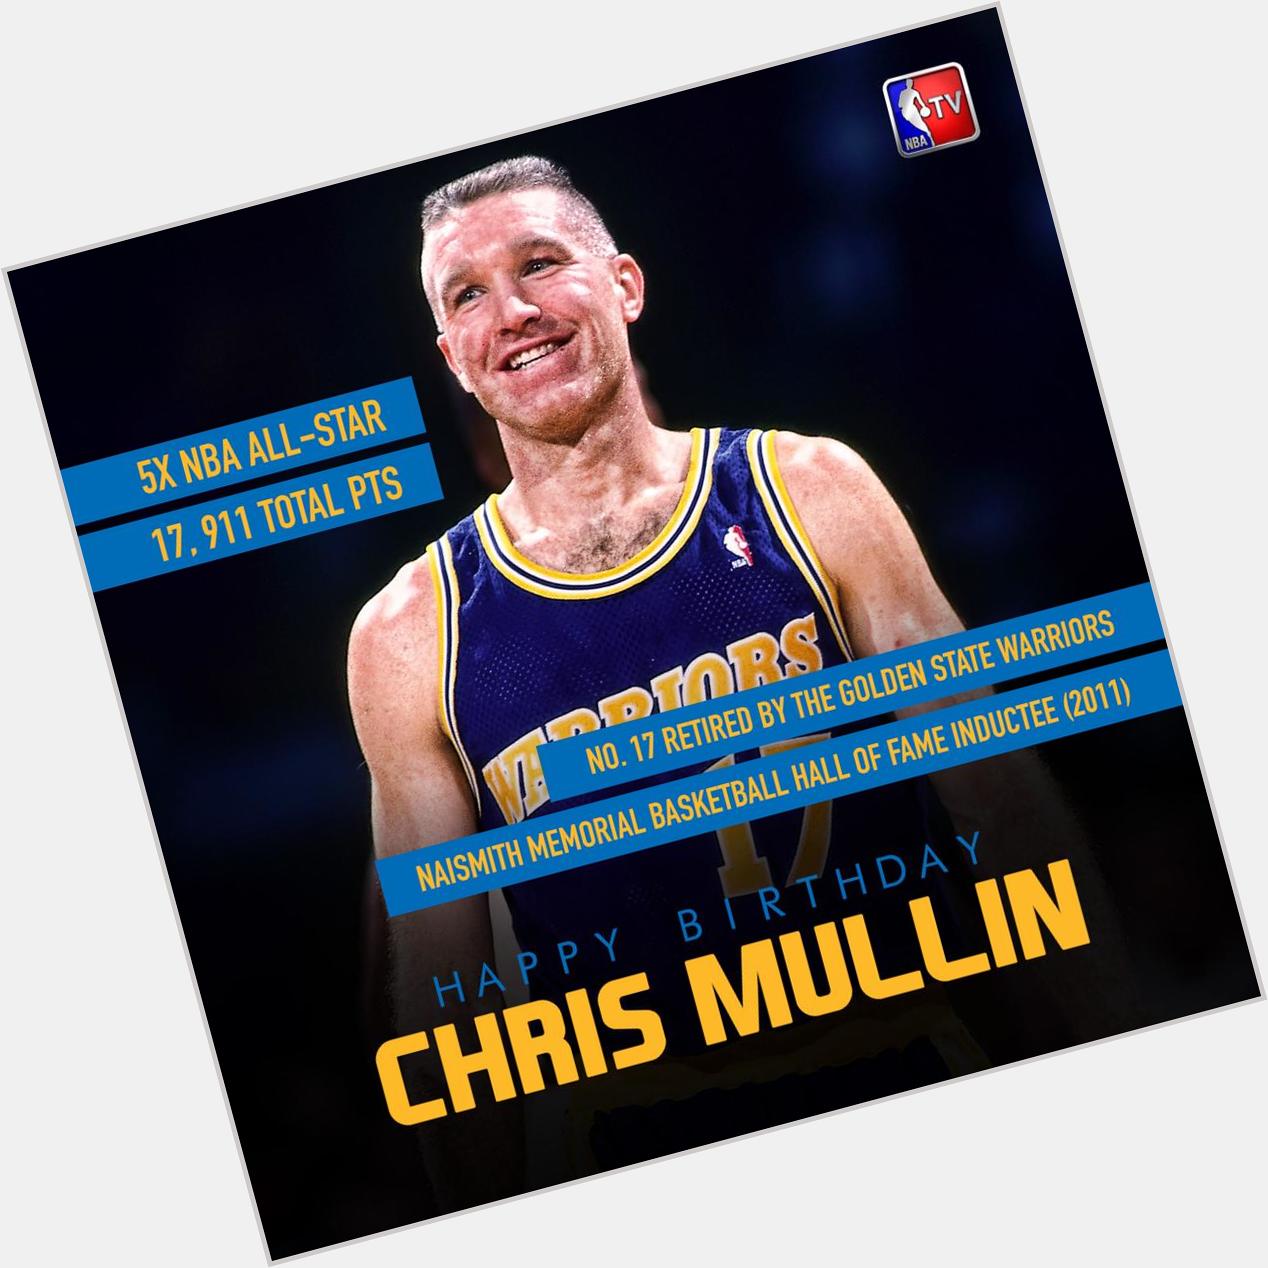  : Join us in wishing Chris Mullin a Happy Birthday! The legend turns 52 today. 